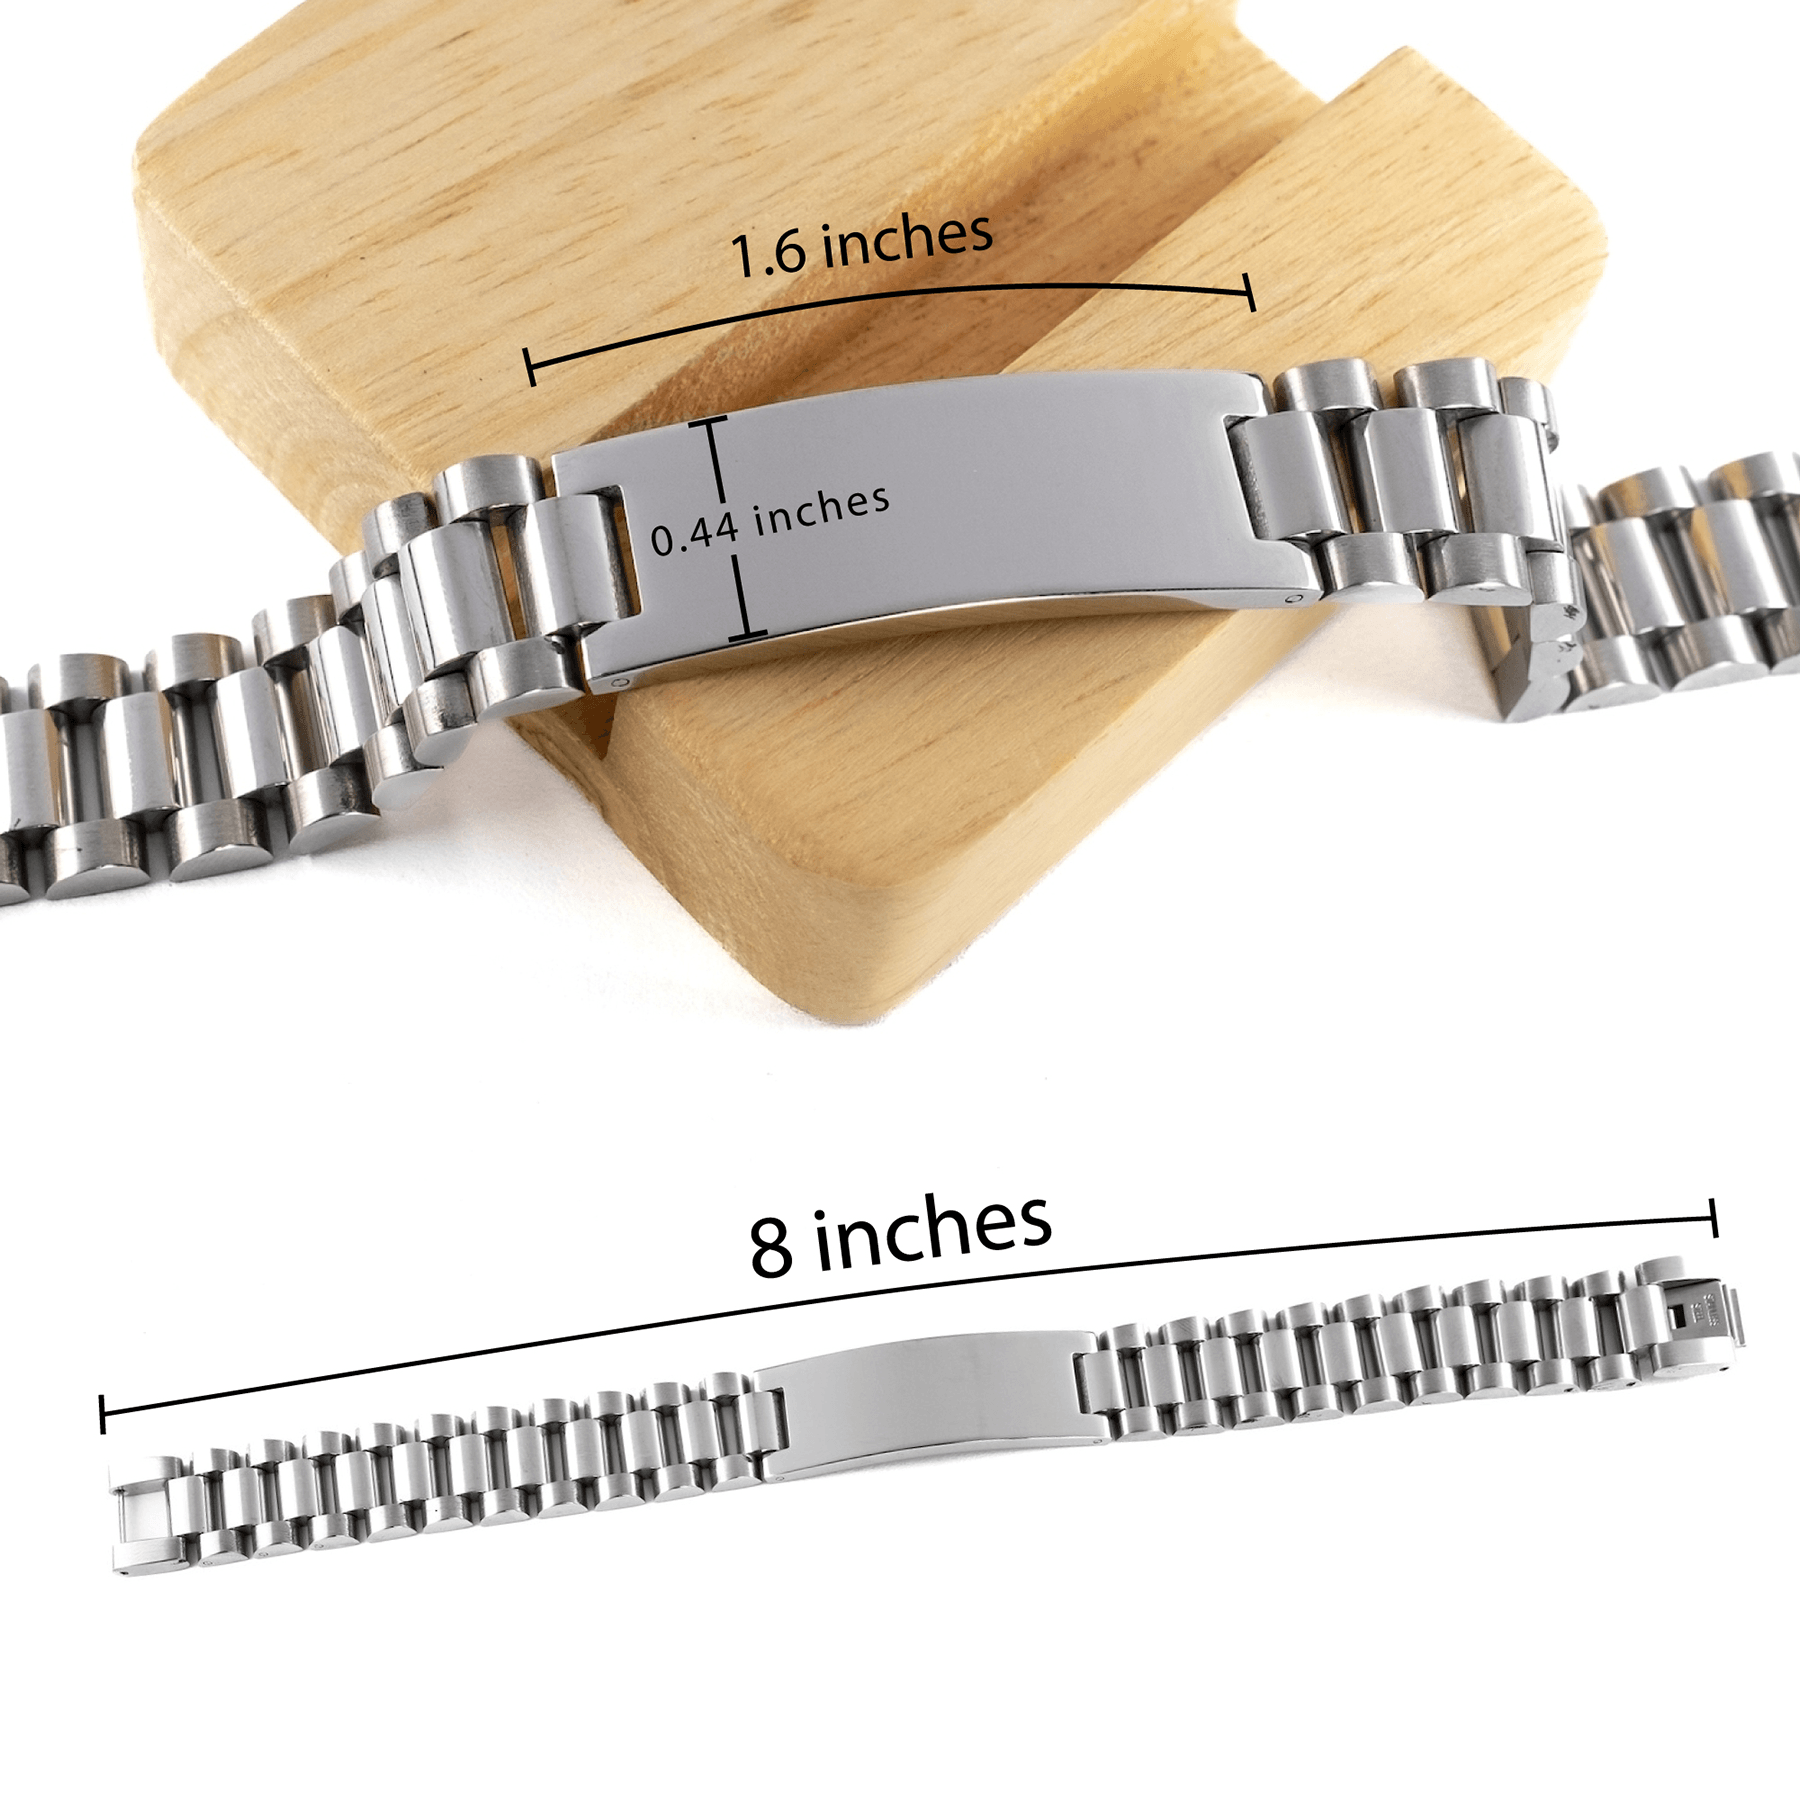 Financial Advisor Ladder Stainless Steel Engraved Bracelet - Thanks for being who you are - Birthday Christmas Jewelry Gifts Coworkers Colleague Boss - Mallard Moon Gift Shop